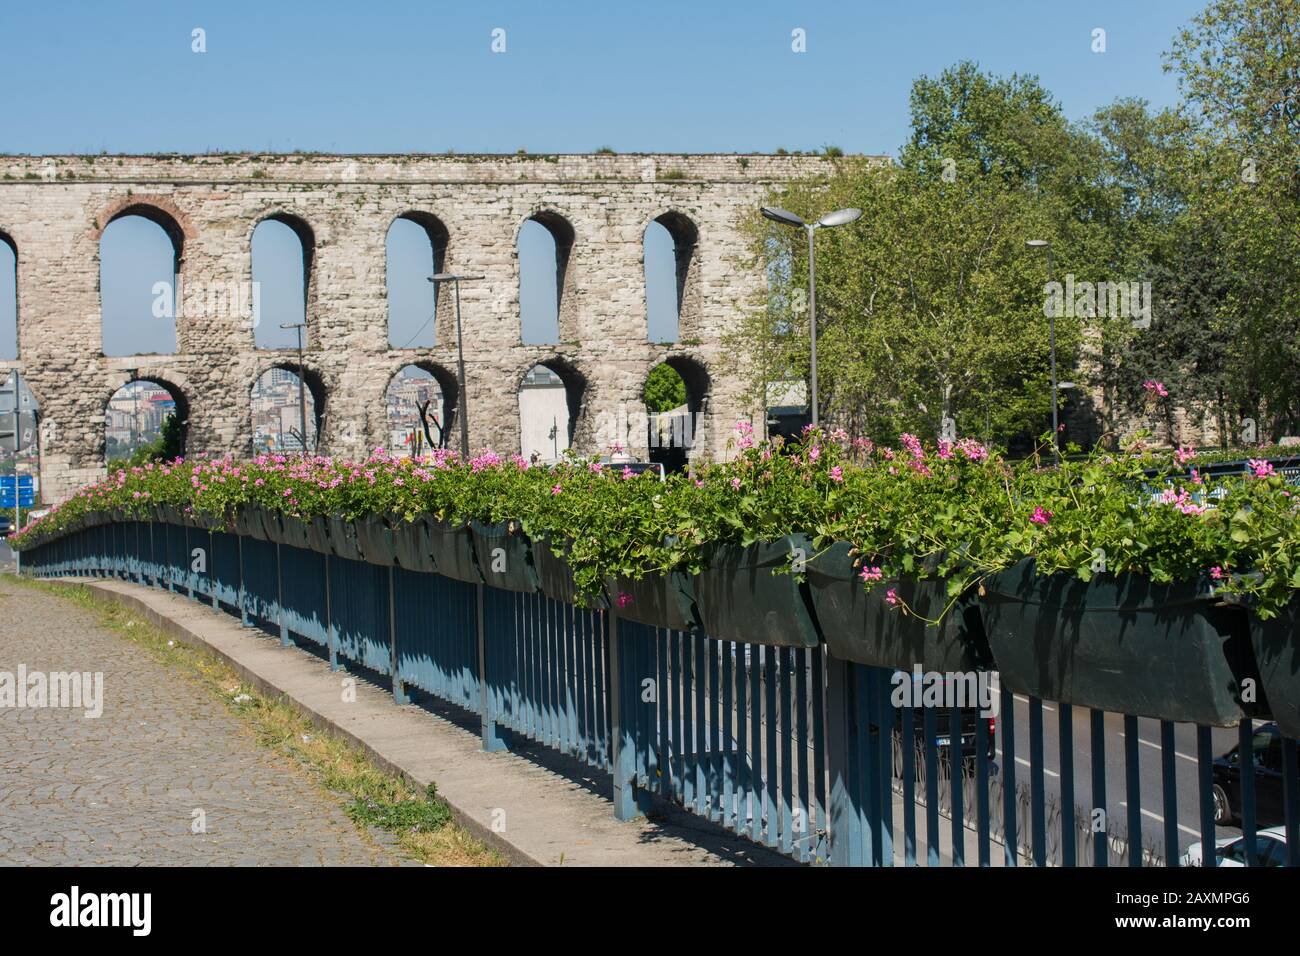 Historical aquedect in Fatih, Istanbul in the view Stock Photo